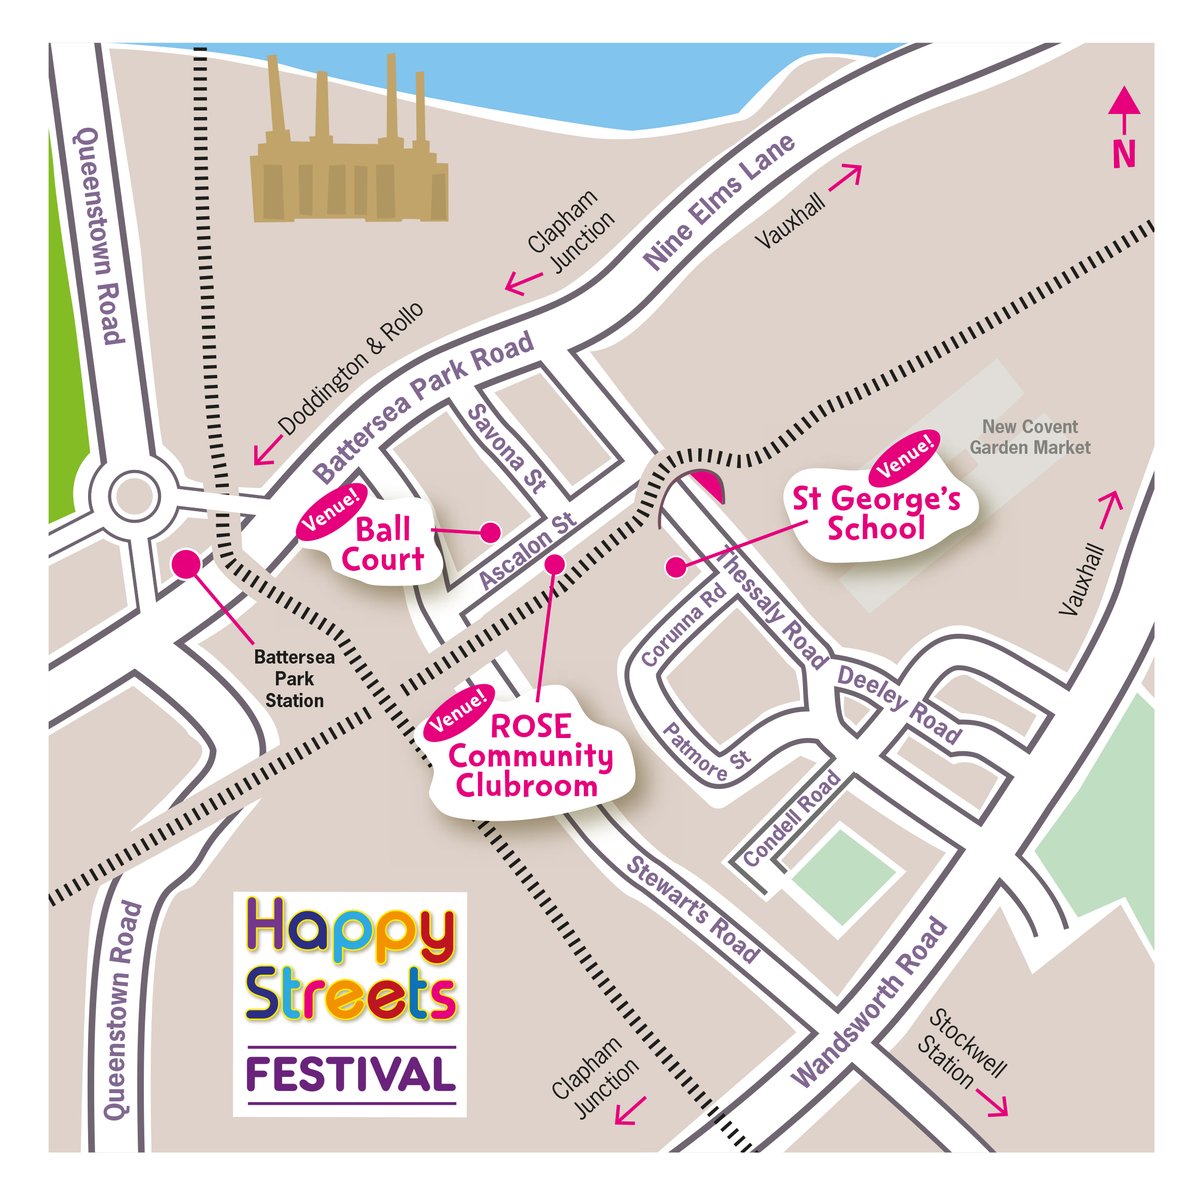 It's ⌛️ to #HappyStreets festival around Thessaly Rd this Saturday, 12-6pm. Find something for all ages - from crafty sessions for little ones to dance & circus workshops, pizza-making, face-painting, bubbles, sports, music and guided walks. Plus Dr Bike! nineelmslondon.com/happystreets